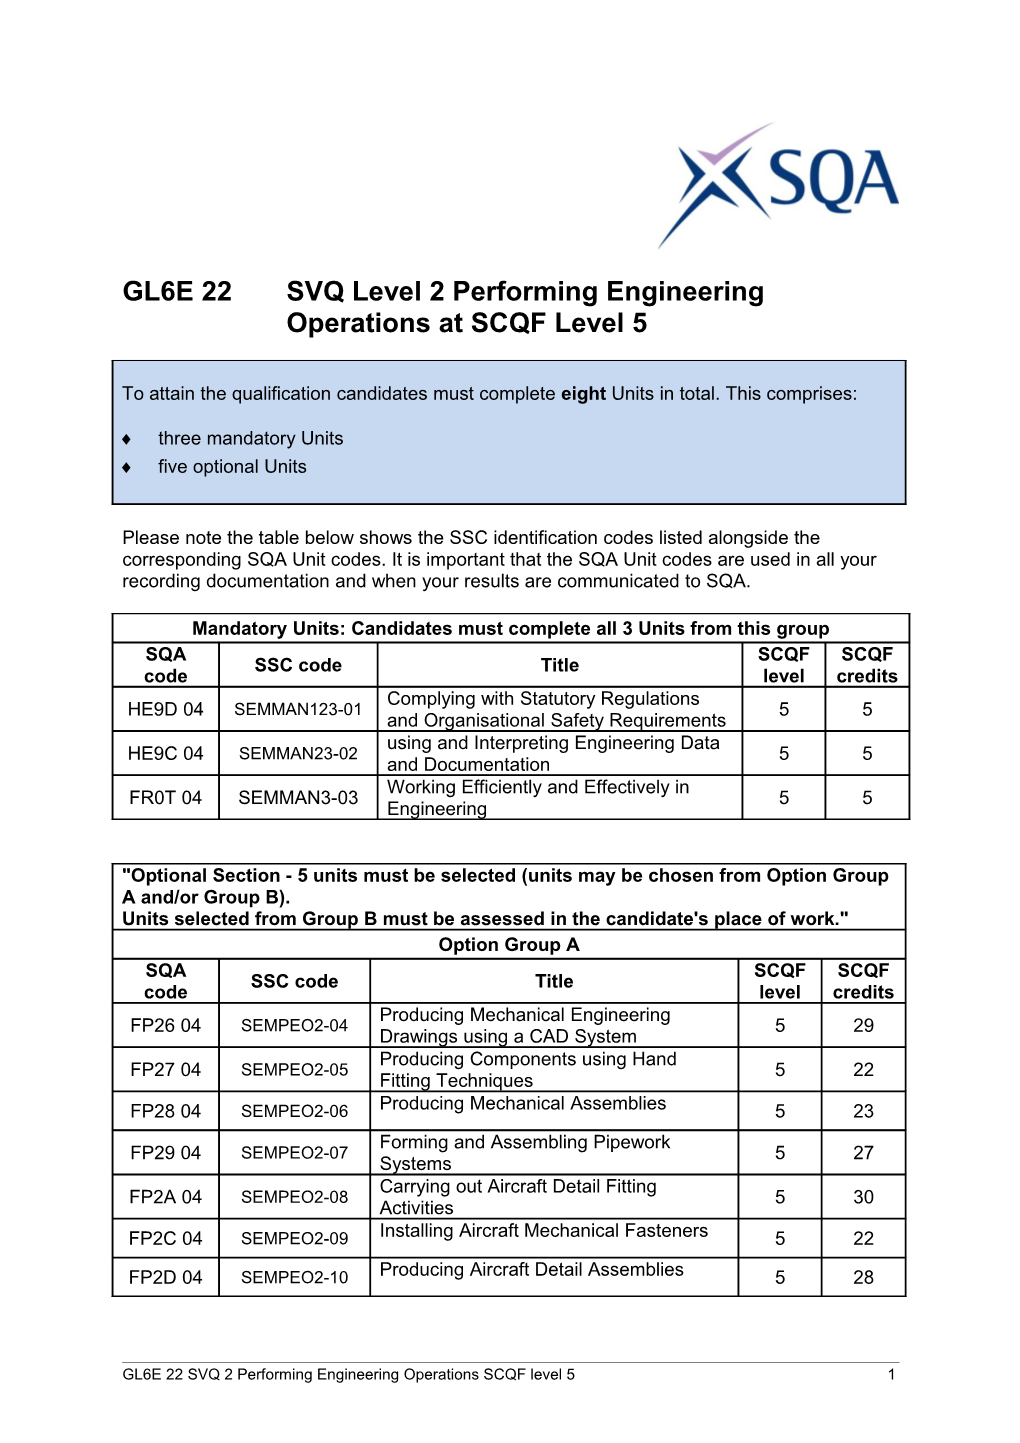 GL6E 22 SVQ 2 Performing Engineering Operations SCQF Level 51